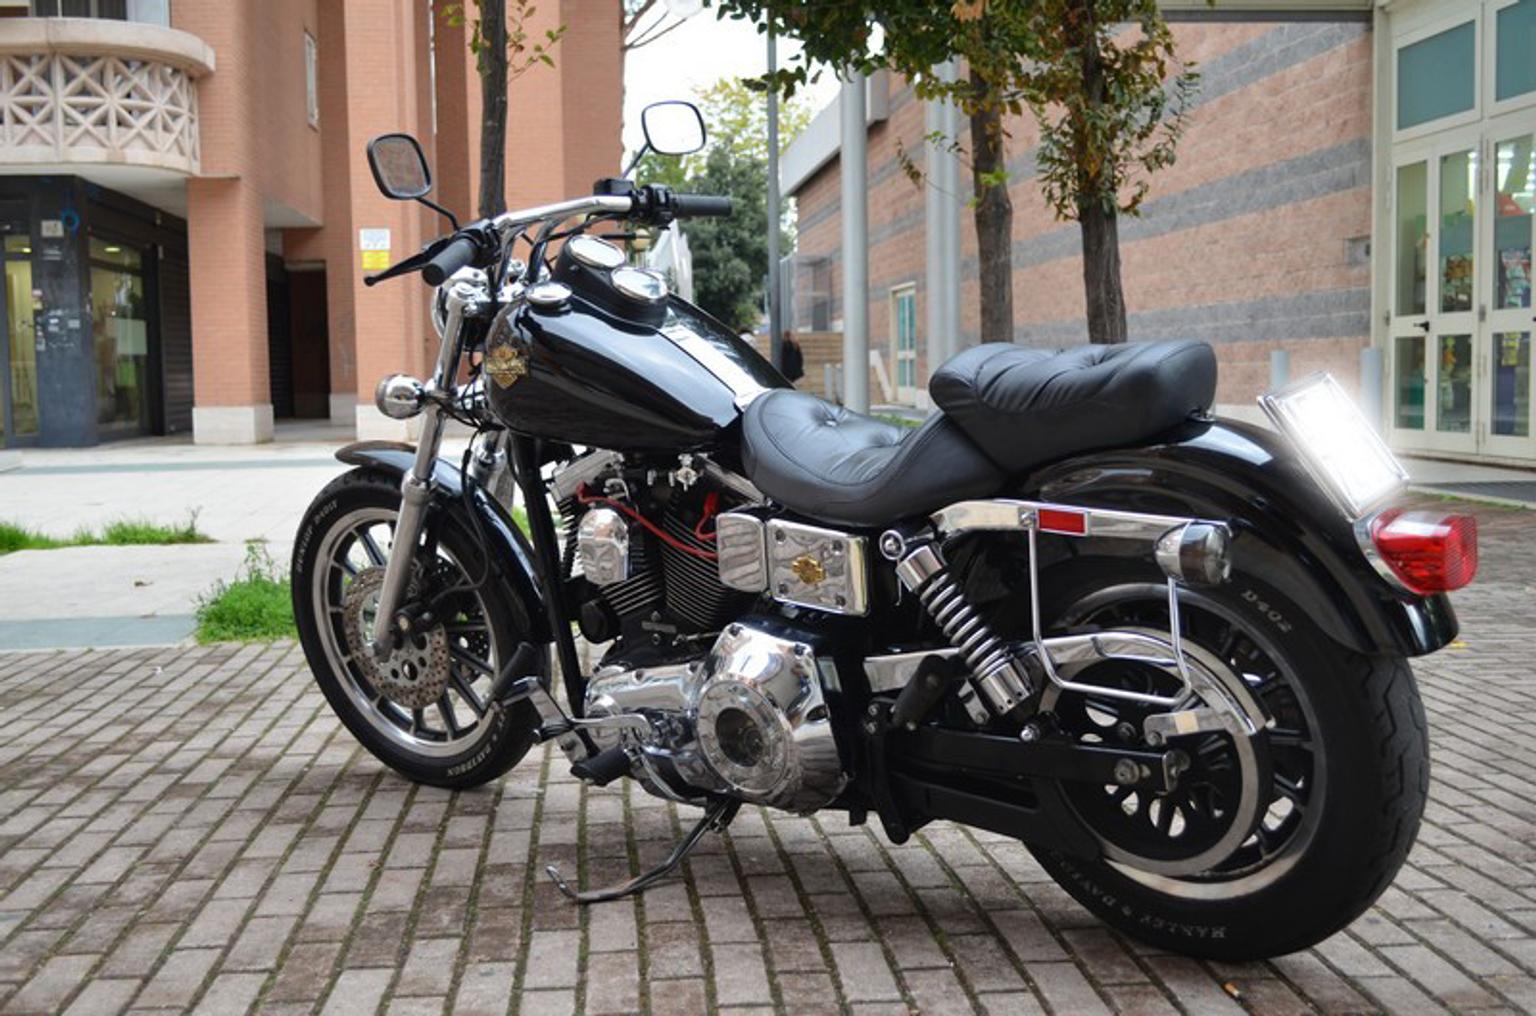 Harley Davidson Dyna Low Rider 1340 Evo In 00175 Roma For 9 900 00 For Sale Shpock